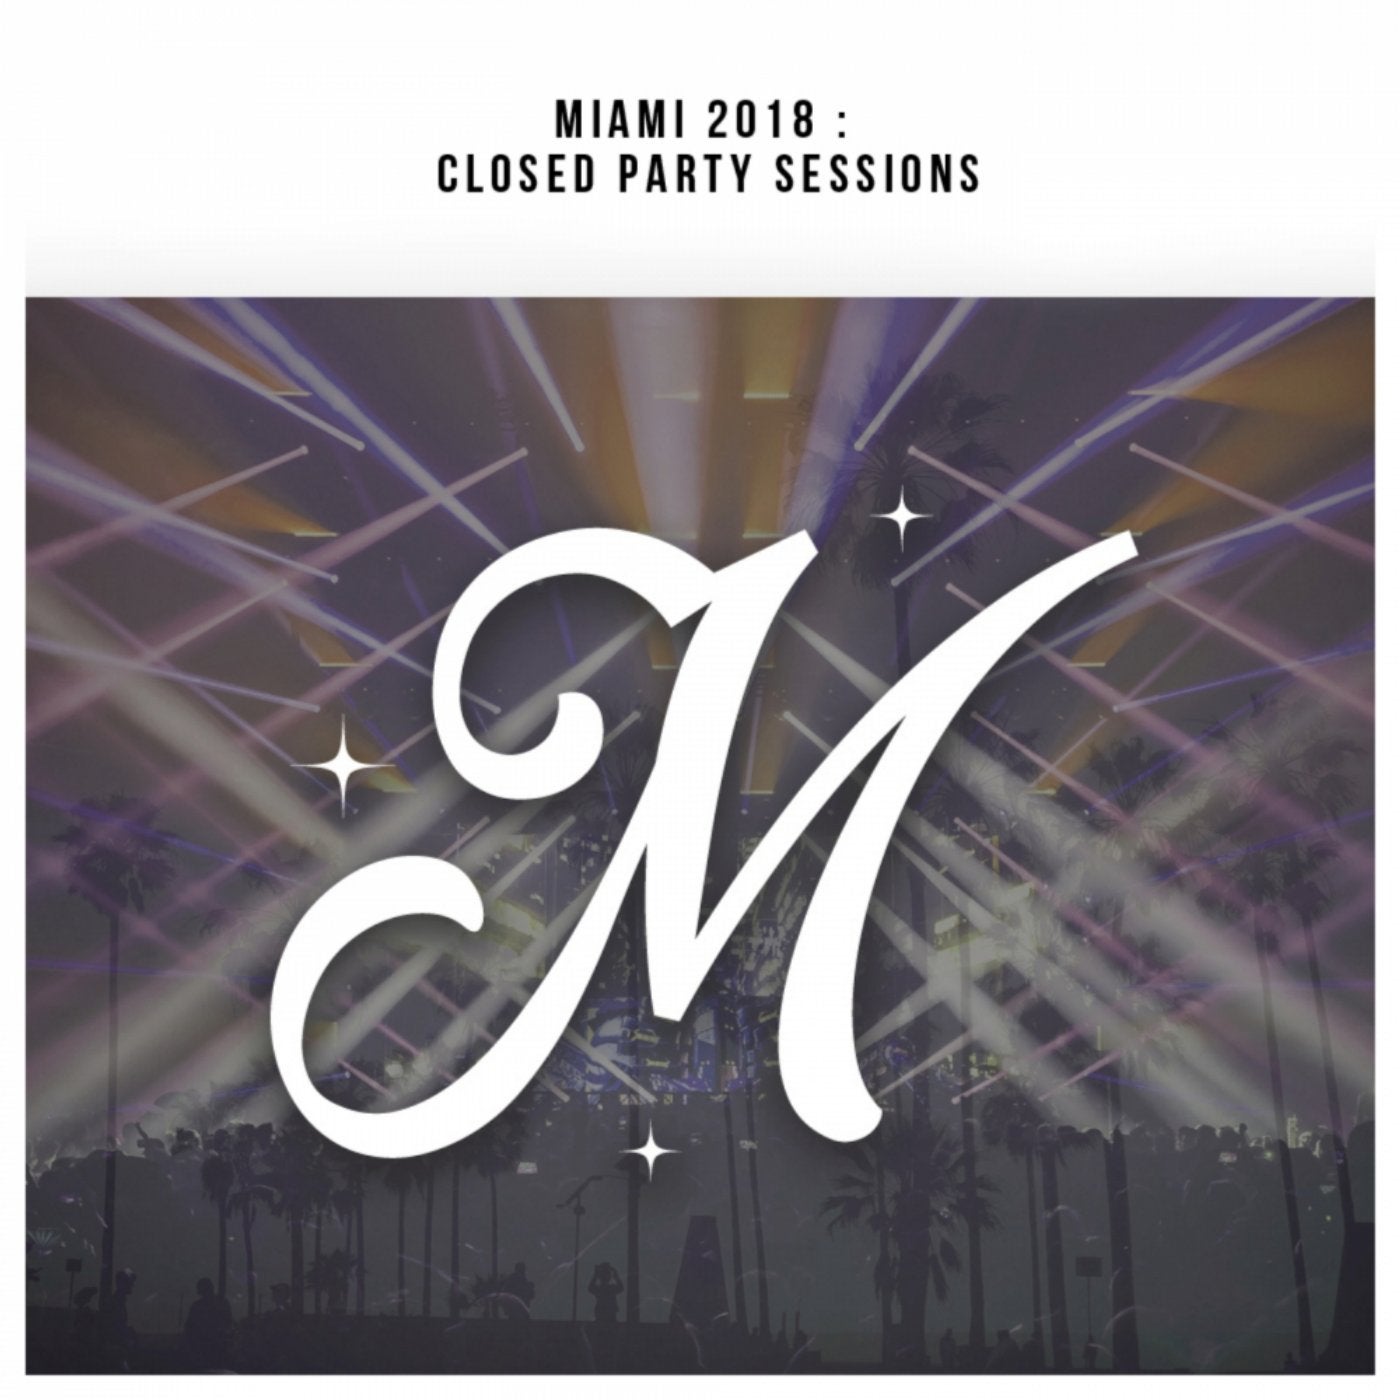 Miami 2018: Closed Party Sessions